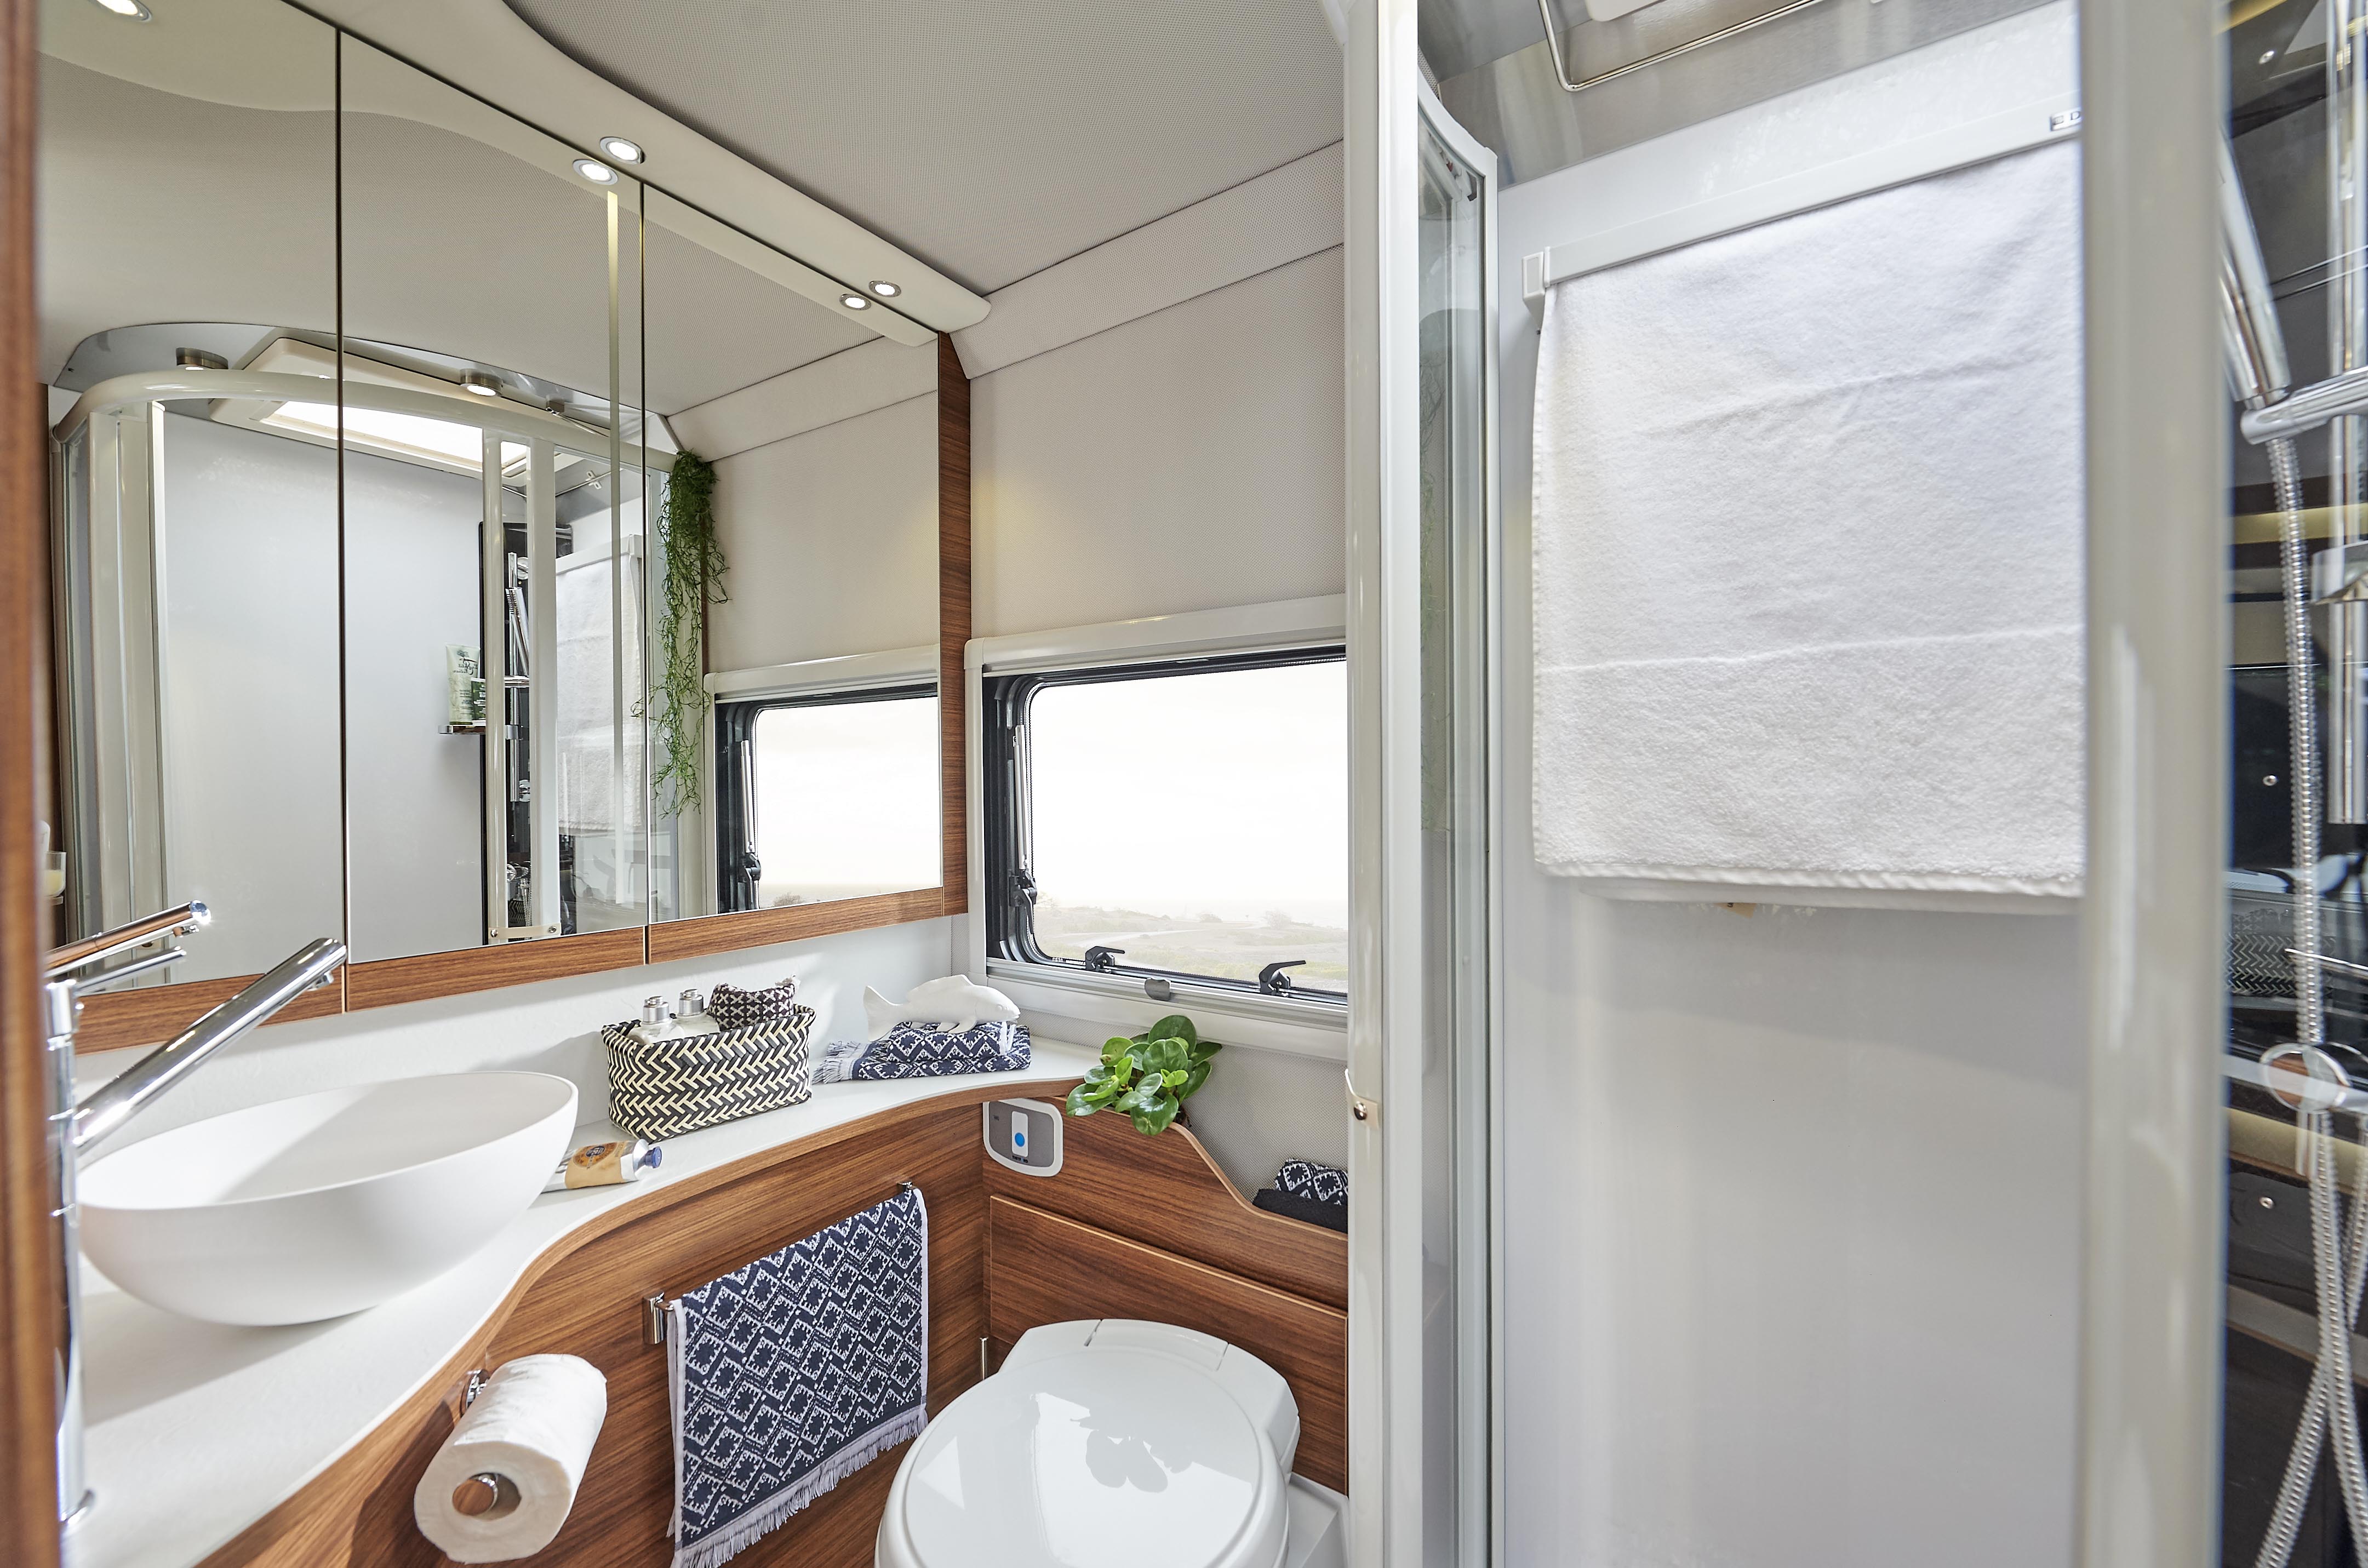 Hygiene when traveling by motorhome – main image